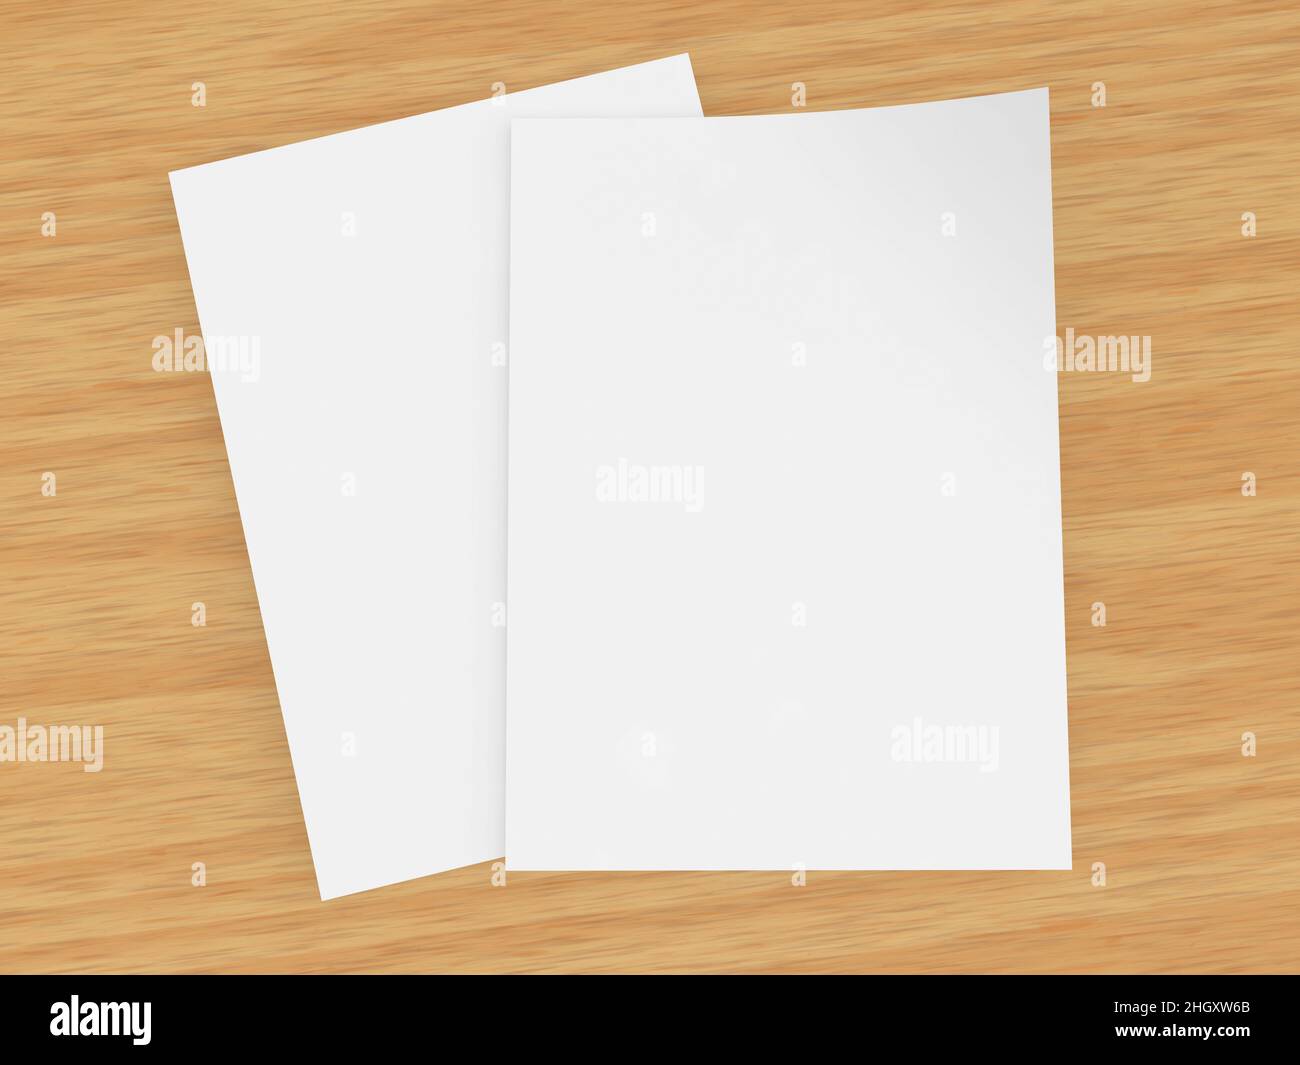 Two sheets of white A4 paper on a wooden table. 3d render illustration. Stock Photo